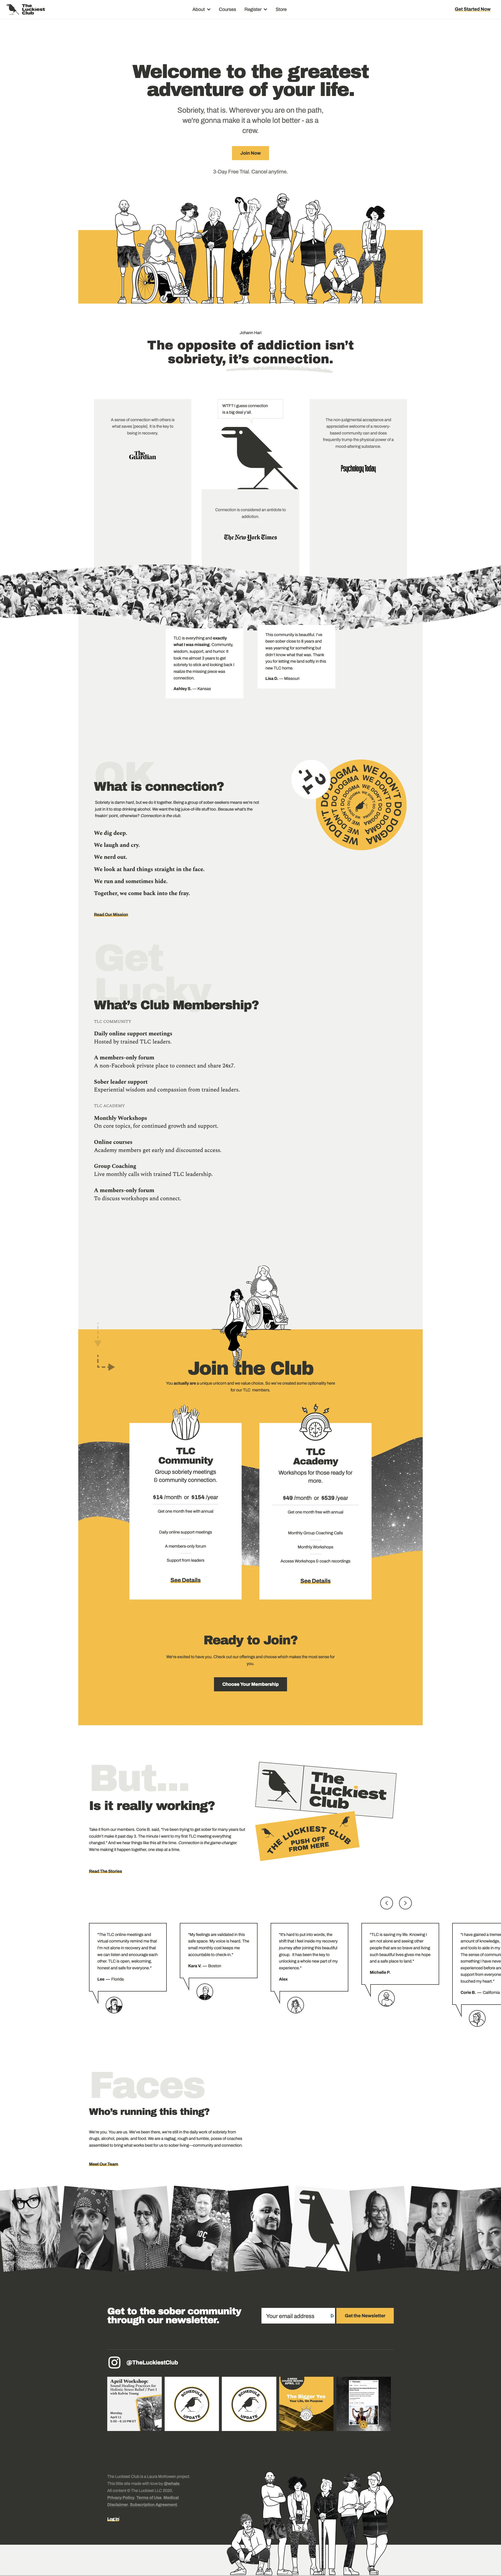 The Luckiest Club Landing Page Example: Welcome to the greatest adventure of your life. Sobriety, that is. Wherever you are on the path, we're gonna make it a whole lot better - as a crew.